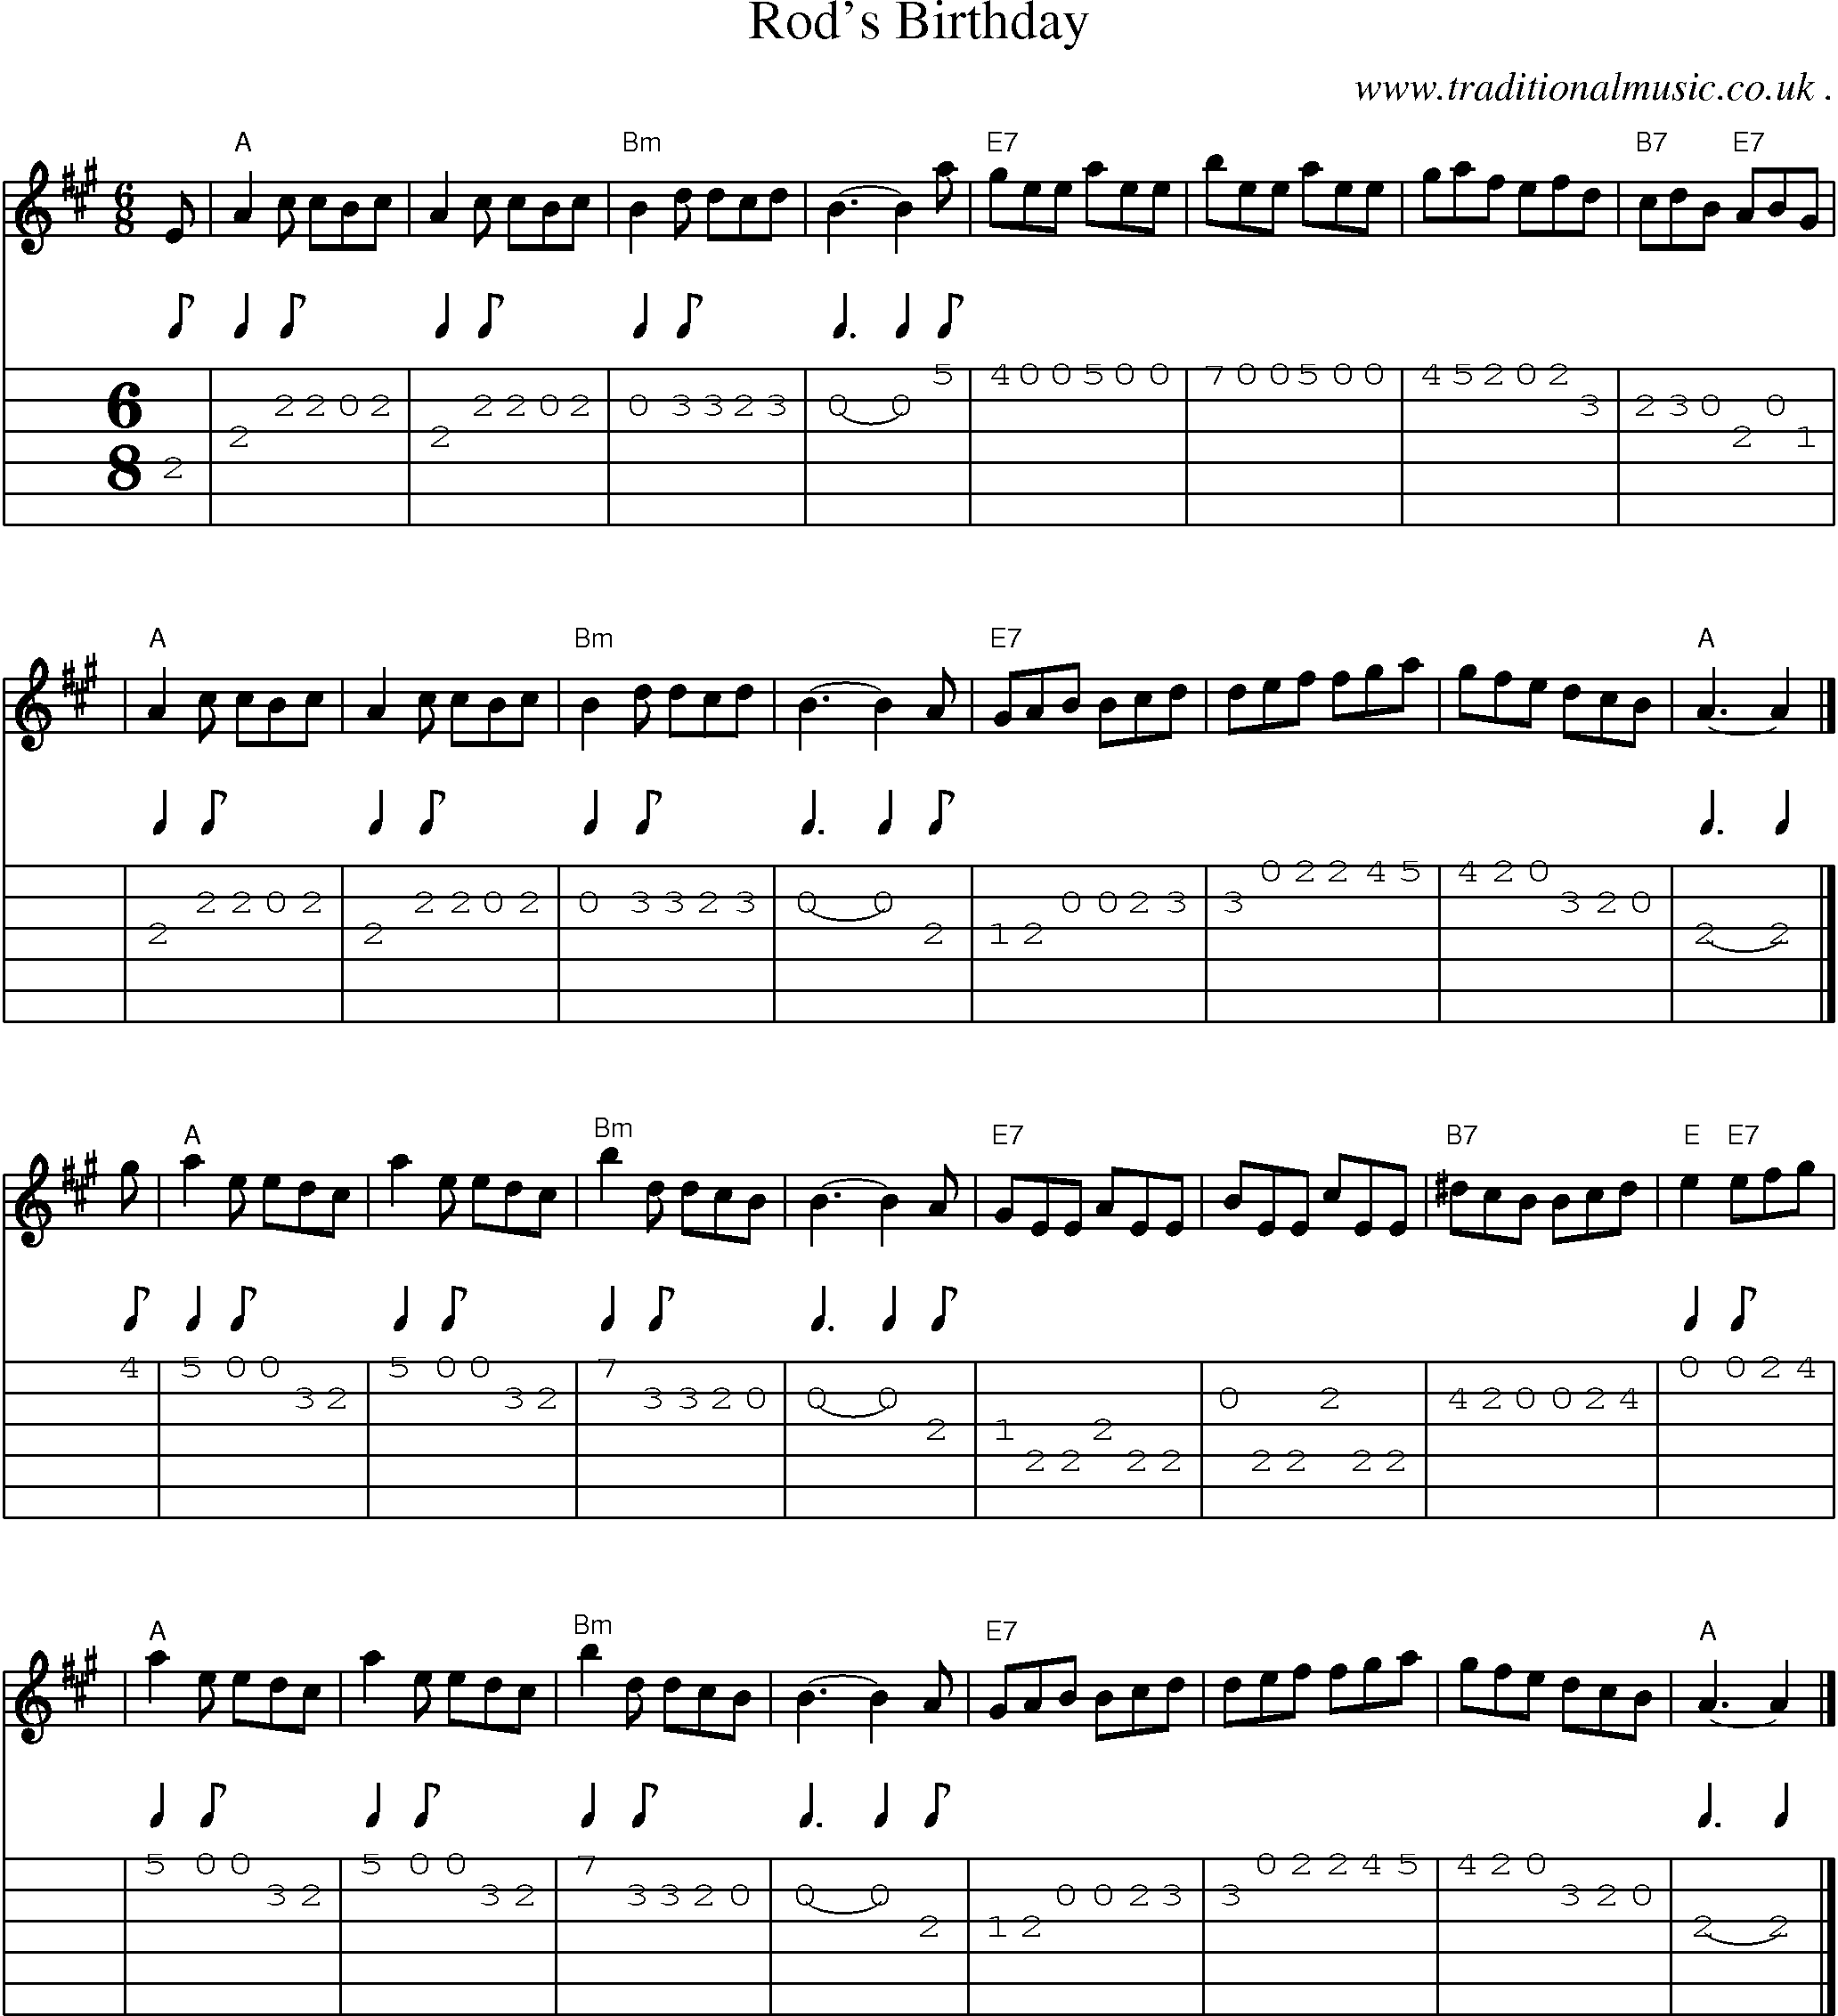 Sheet-music  score, Chords and Guitar Tabs for Rods Birthday